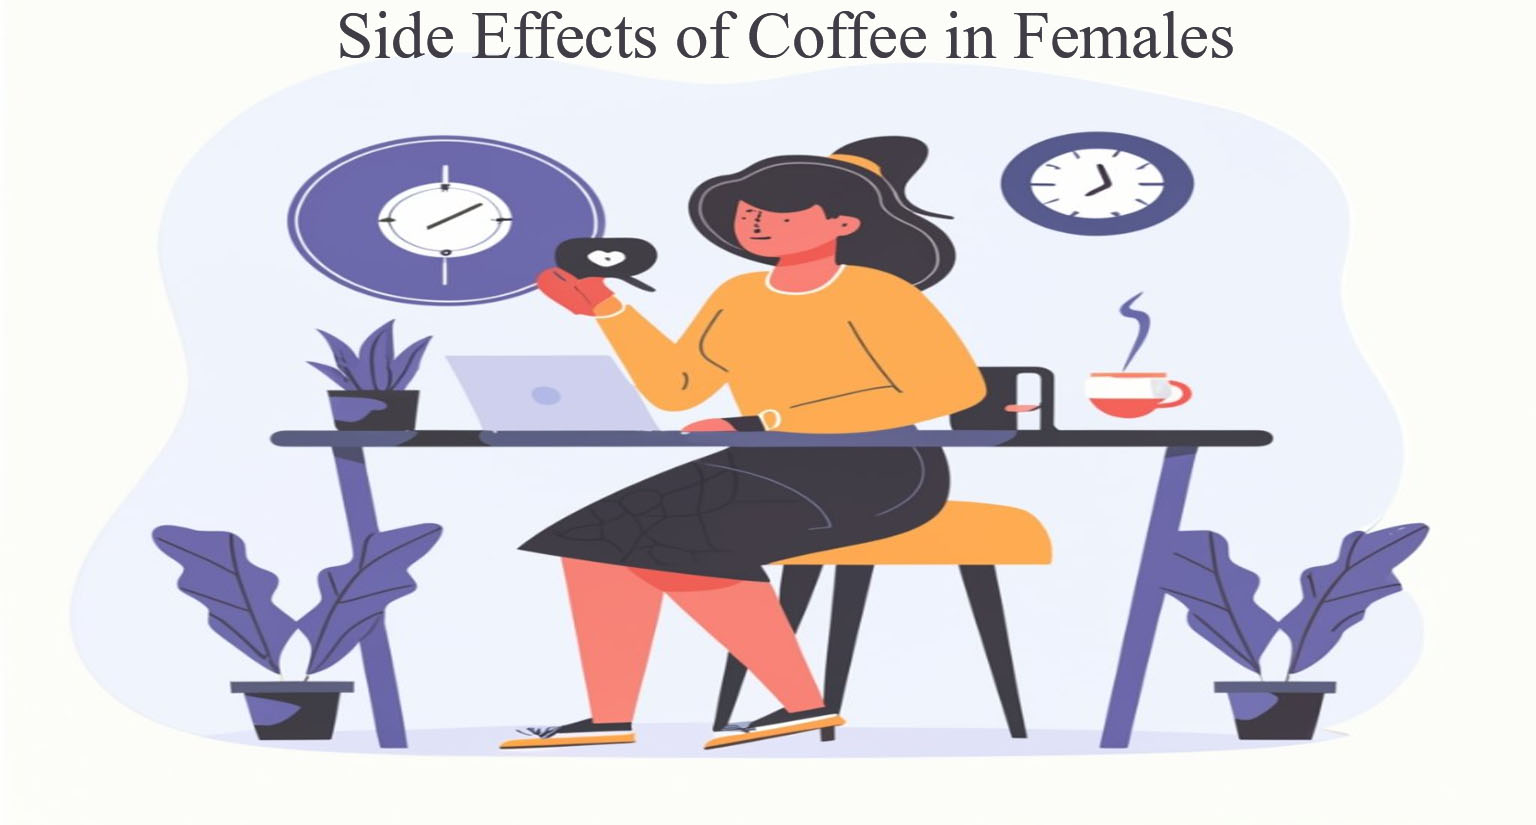 Side effects of coffee in females